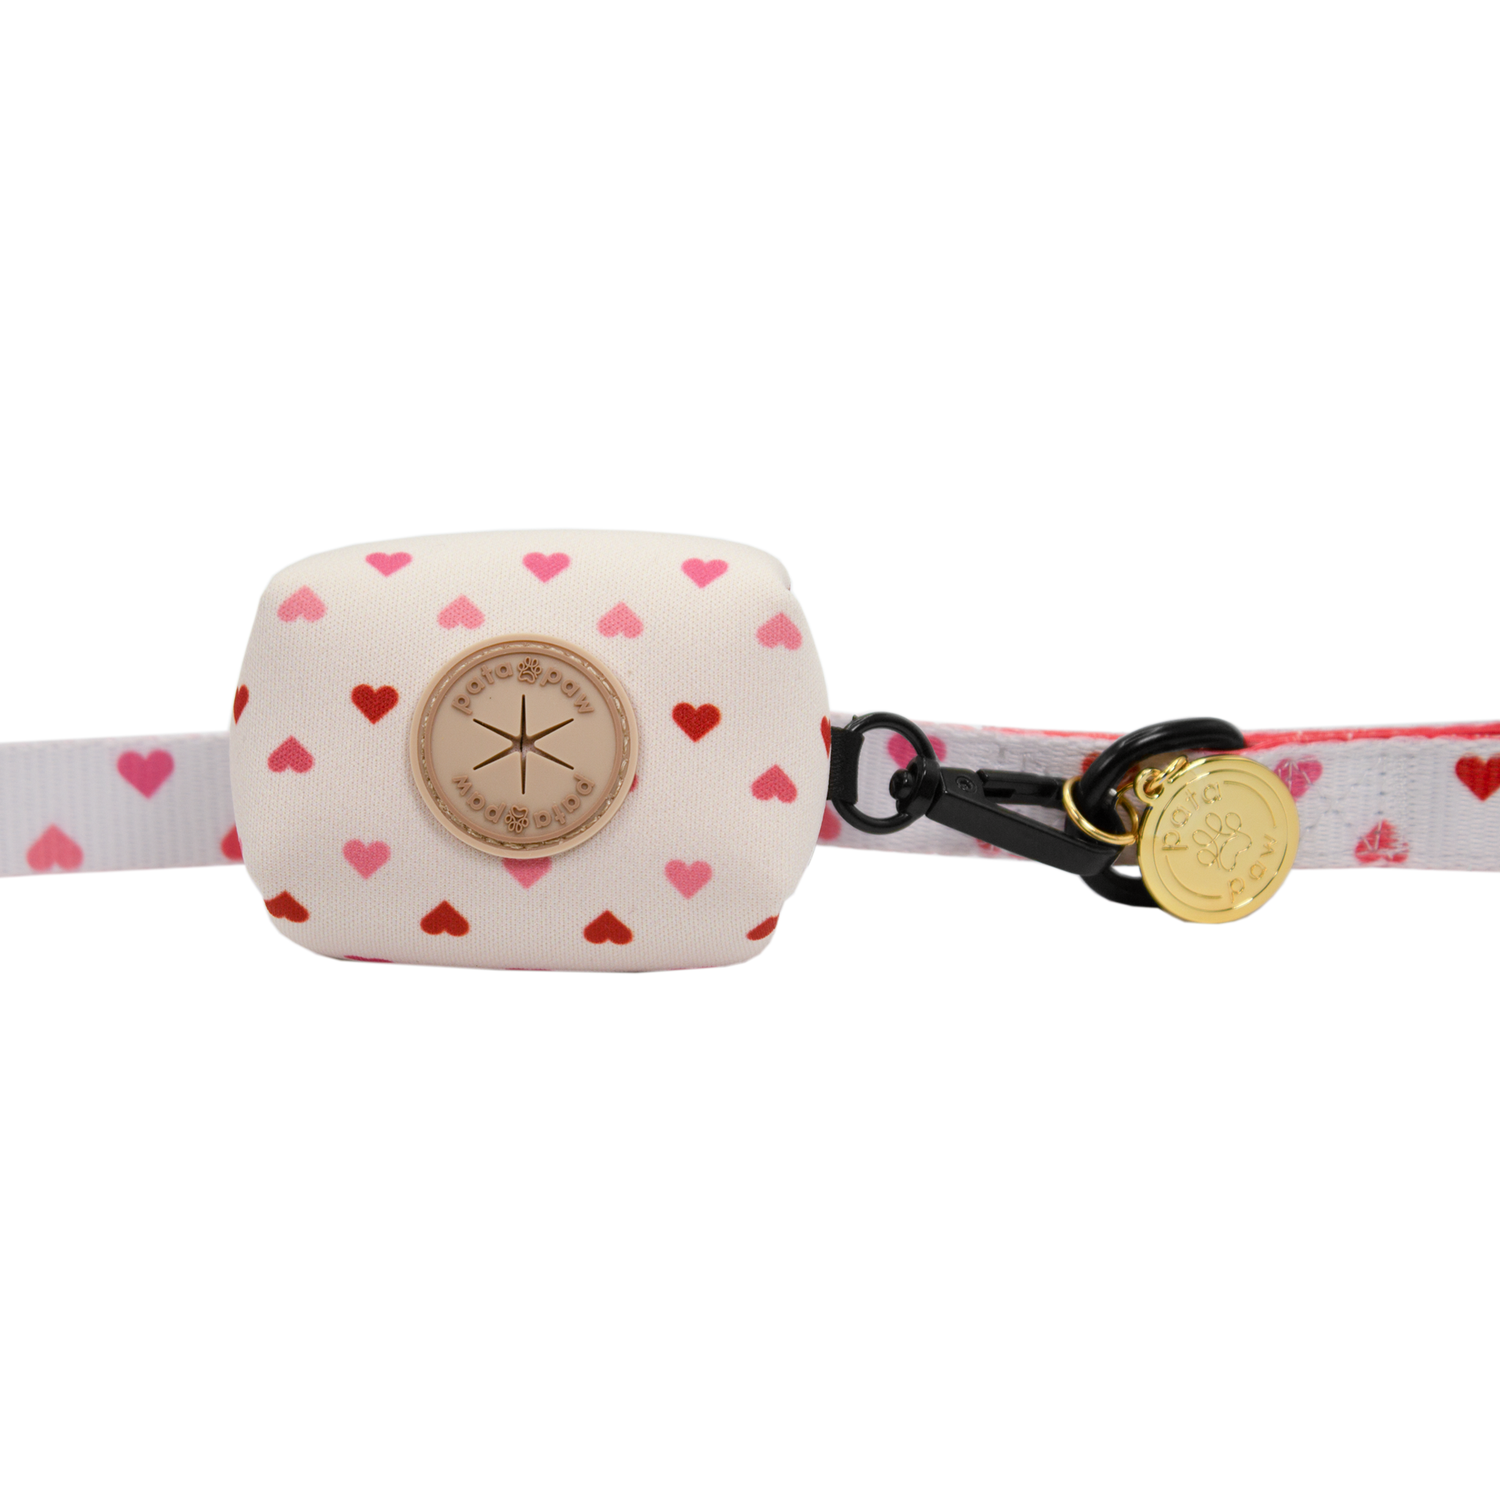 pata paw blush hearts leash with poop bag holder